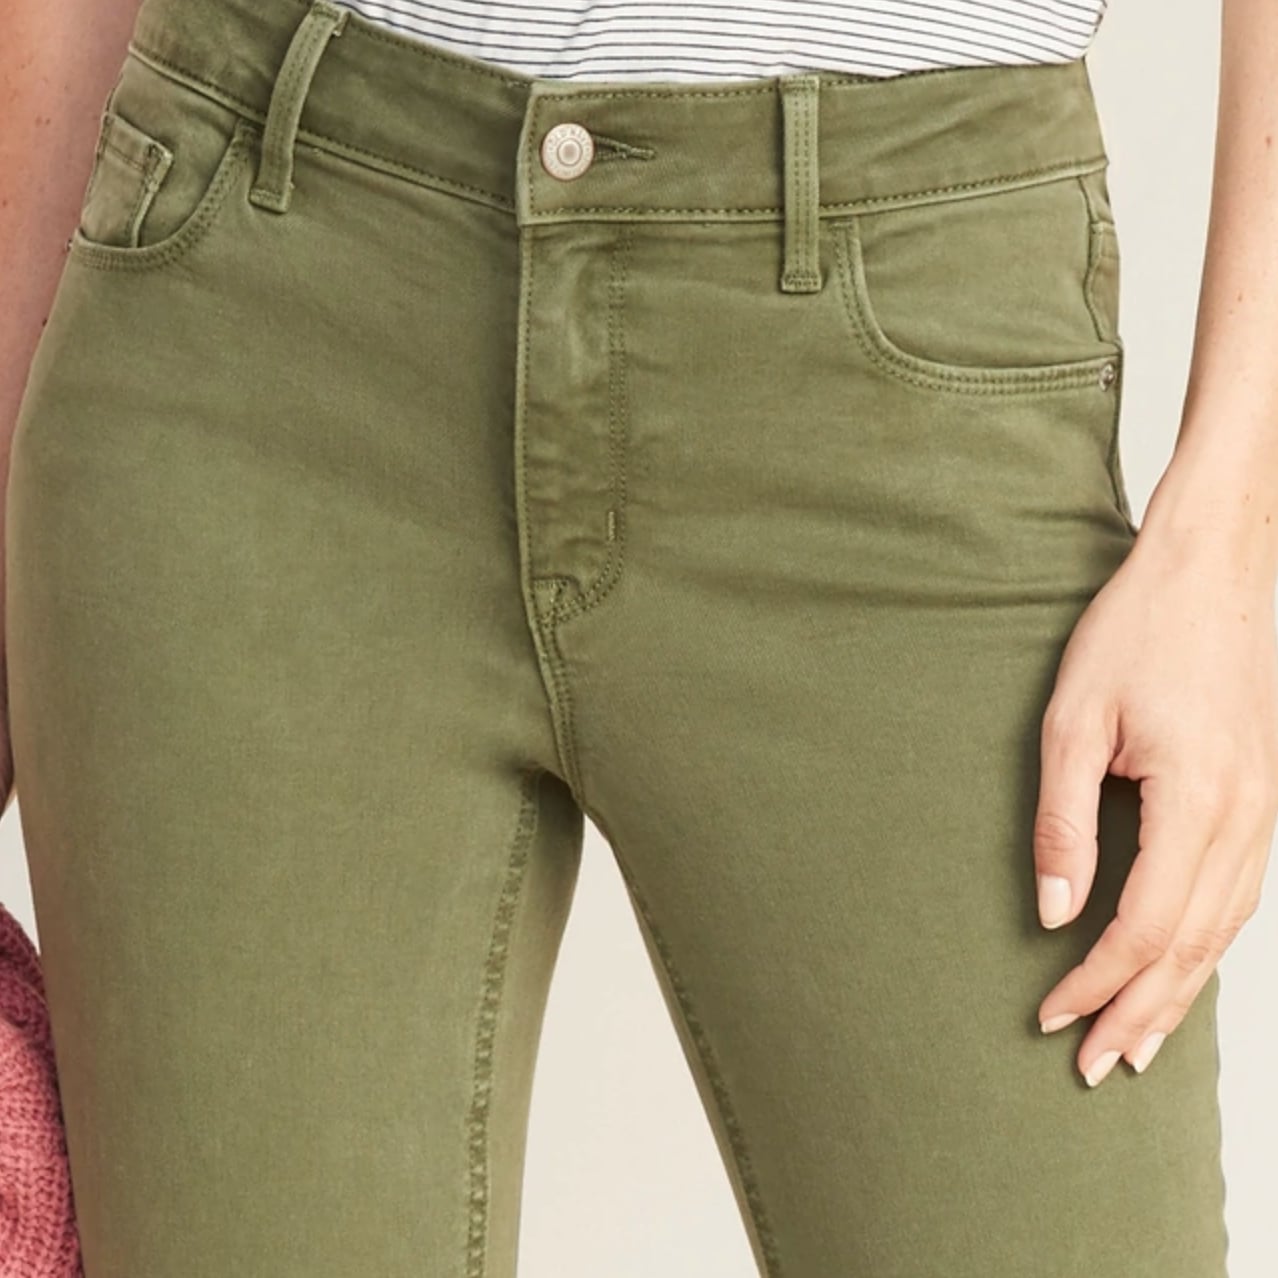 green jeans old navy